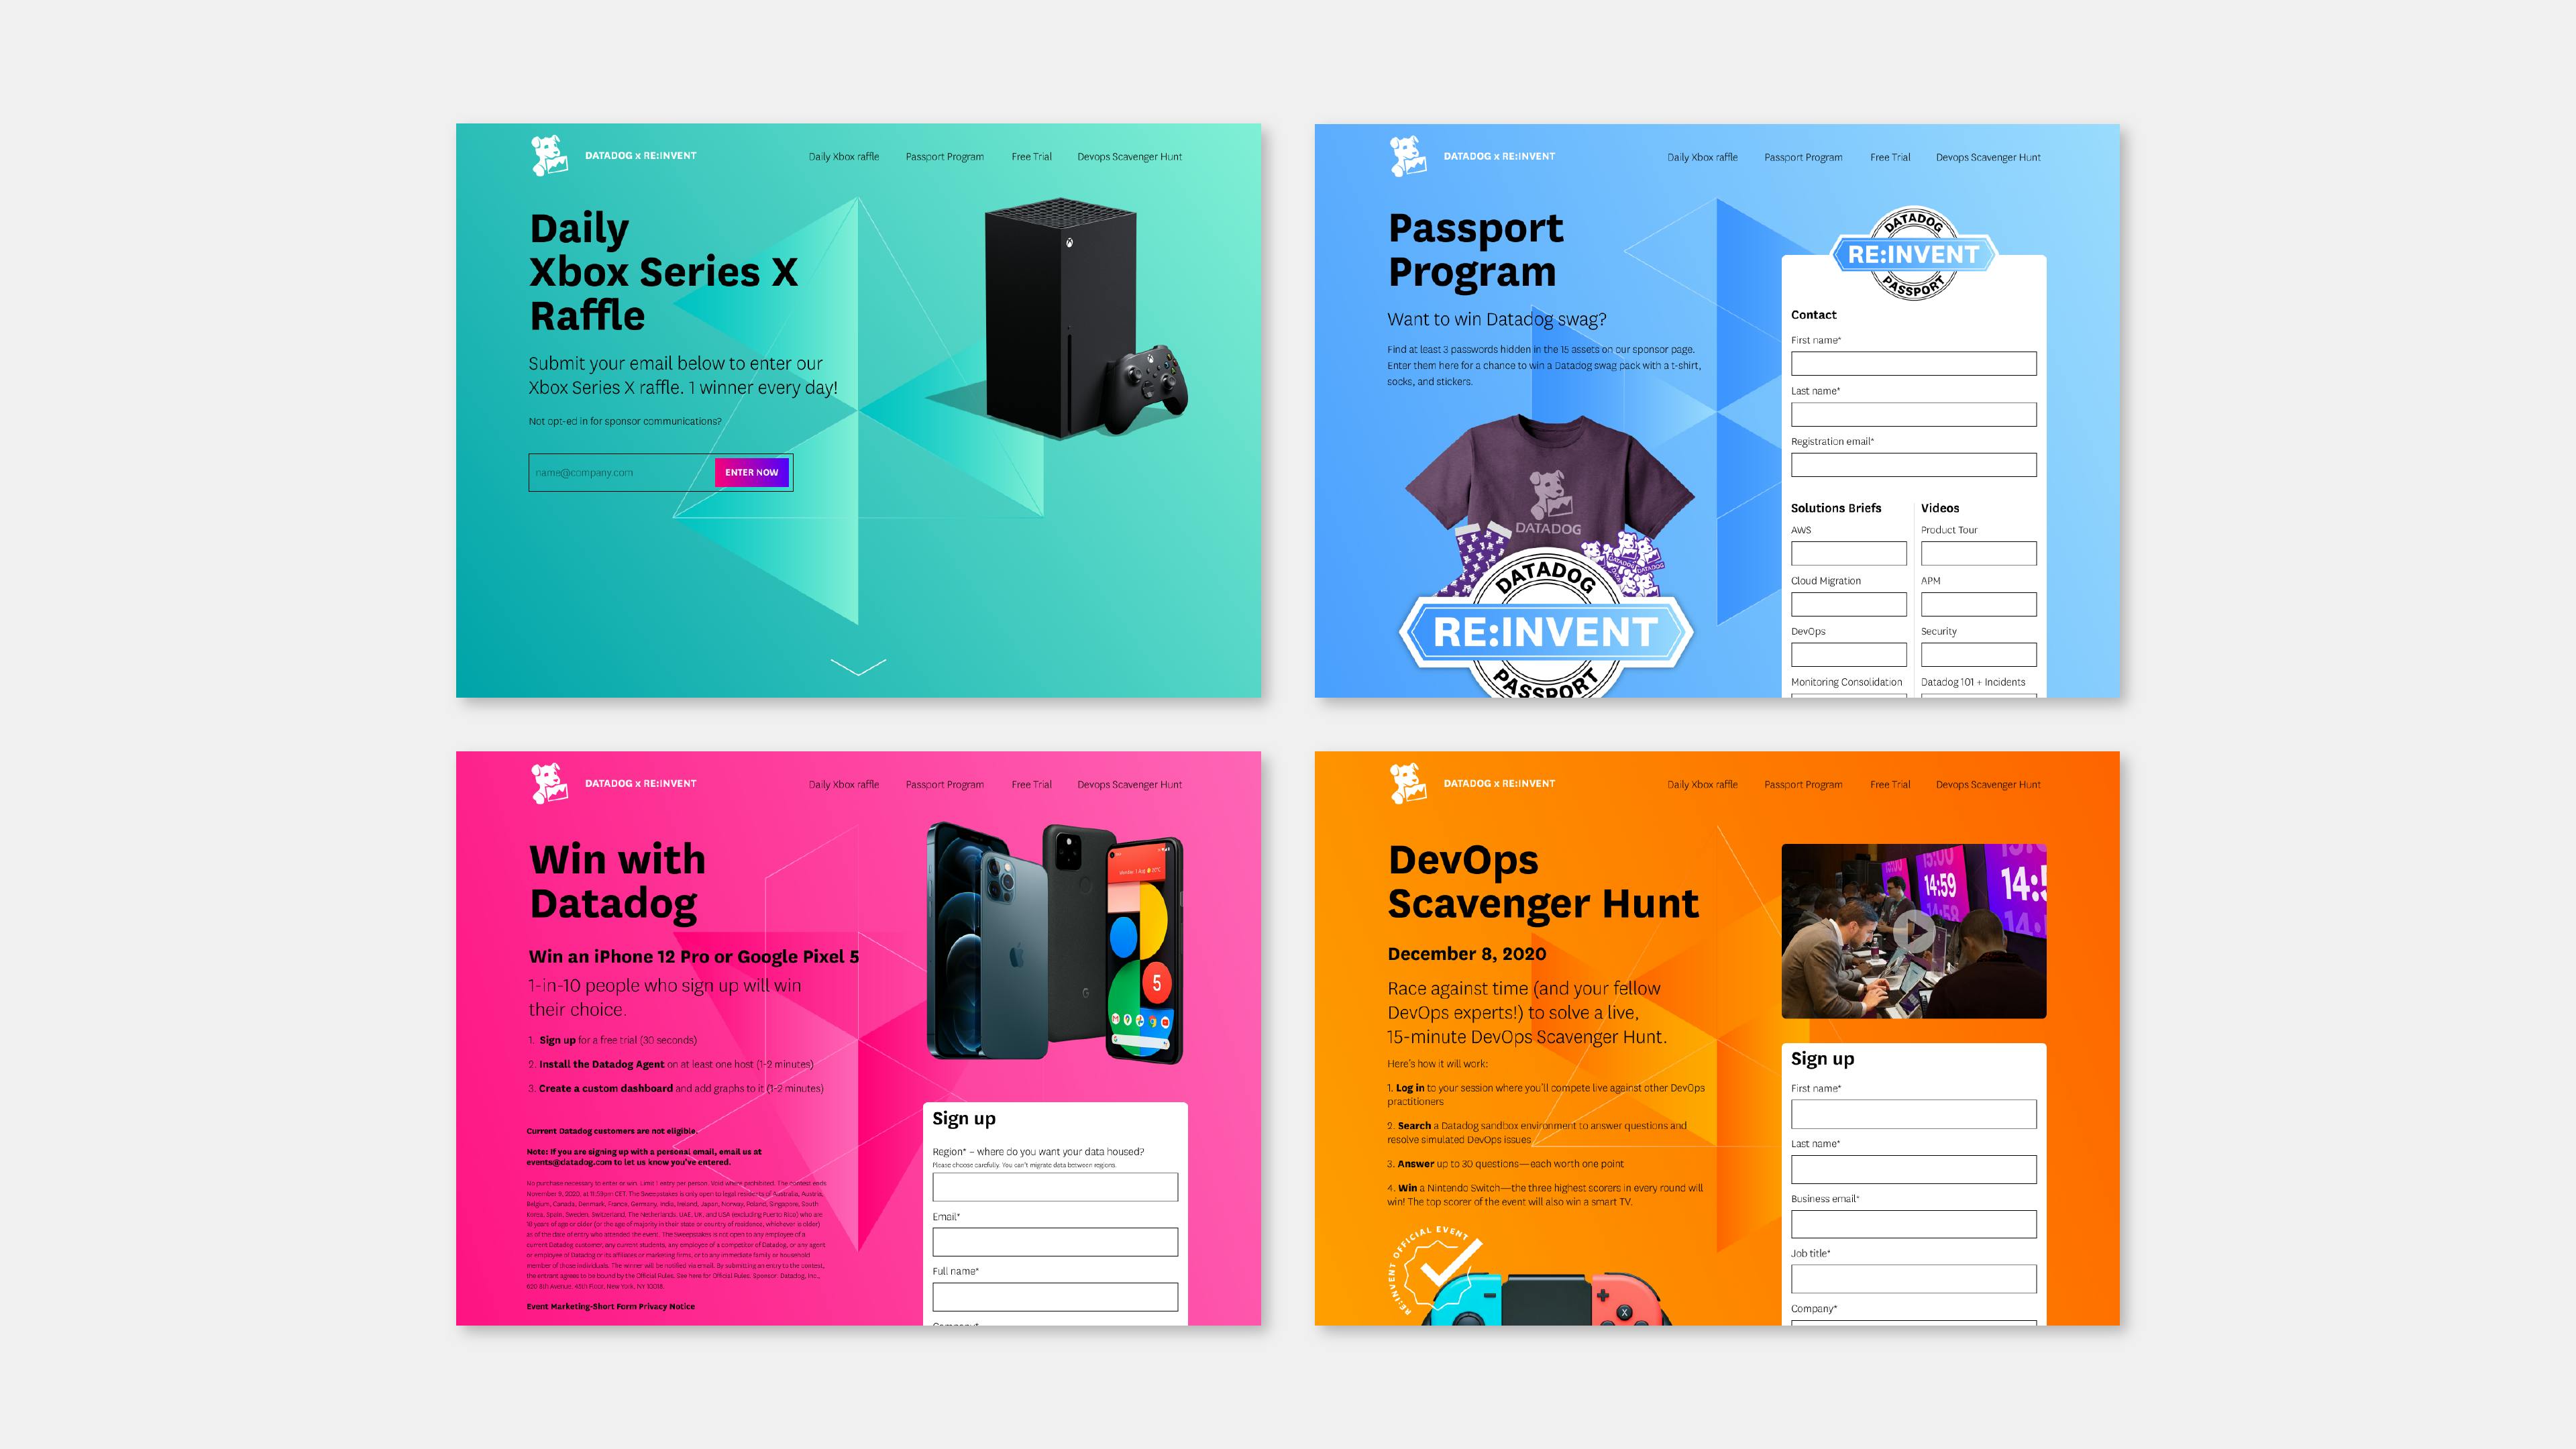 Four screencaptures of Datadog at AWS re:Invent 2020 registration landing pages. Arranged in two rows of two, the four pages share the hexagonal shape motif and bold lettering to display information and forms that are page specific. From top left to bottom right: the Daily Xbox Series X Raffle registration page(blue-green), the Passport Program(blue), the Win With Datadog raffle registration page(bright pink), and the DevOps Scavenger Hunt registration page(orange).